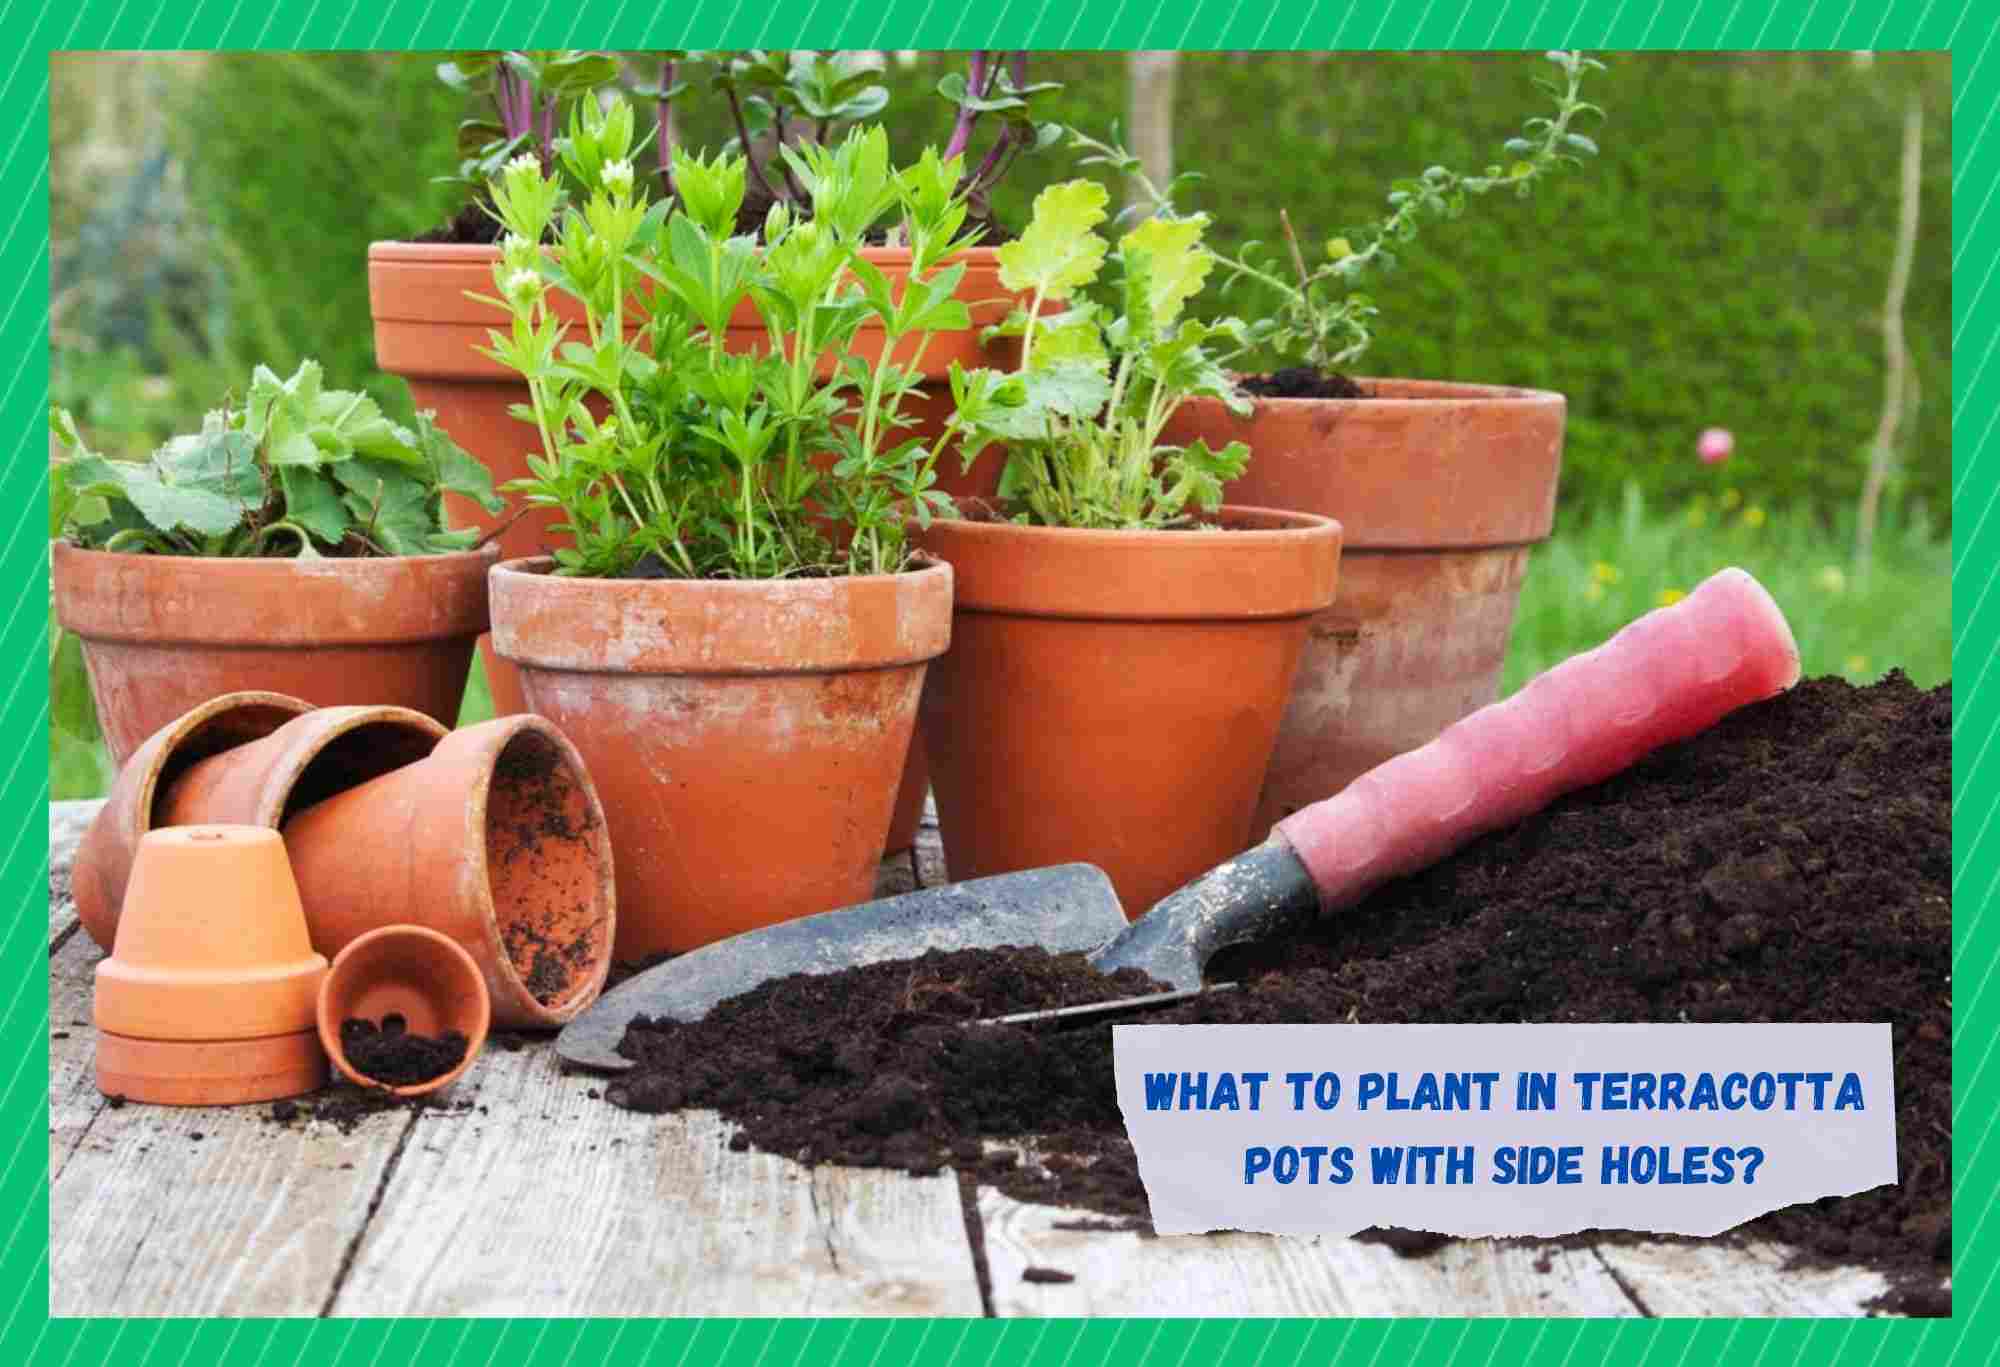 What To Plant in Terracotta Pots with Side Holes? (Suggestions)